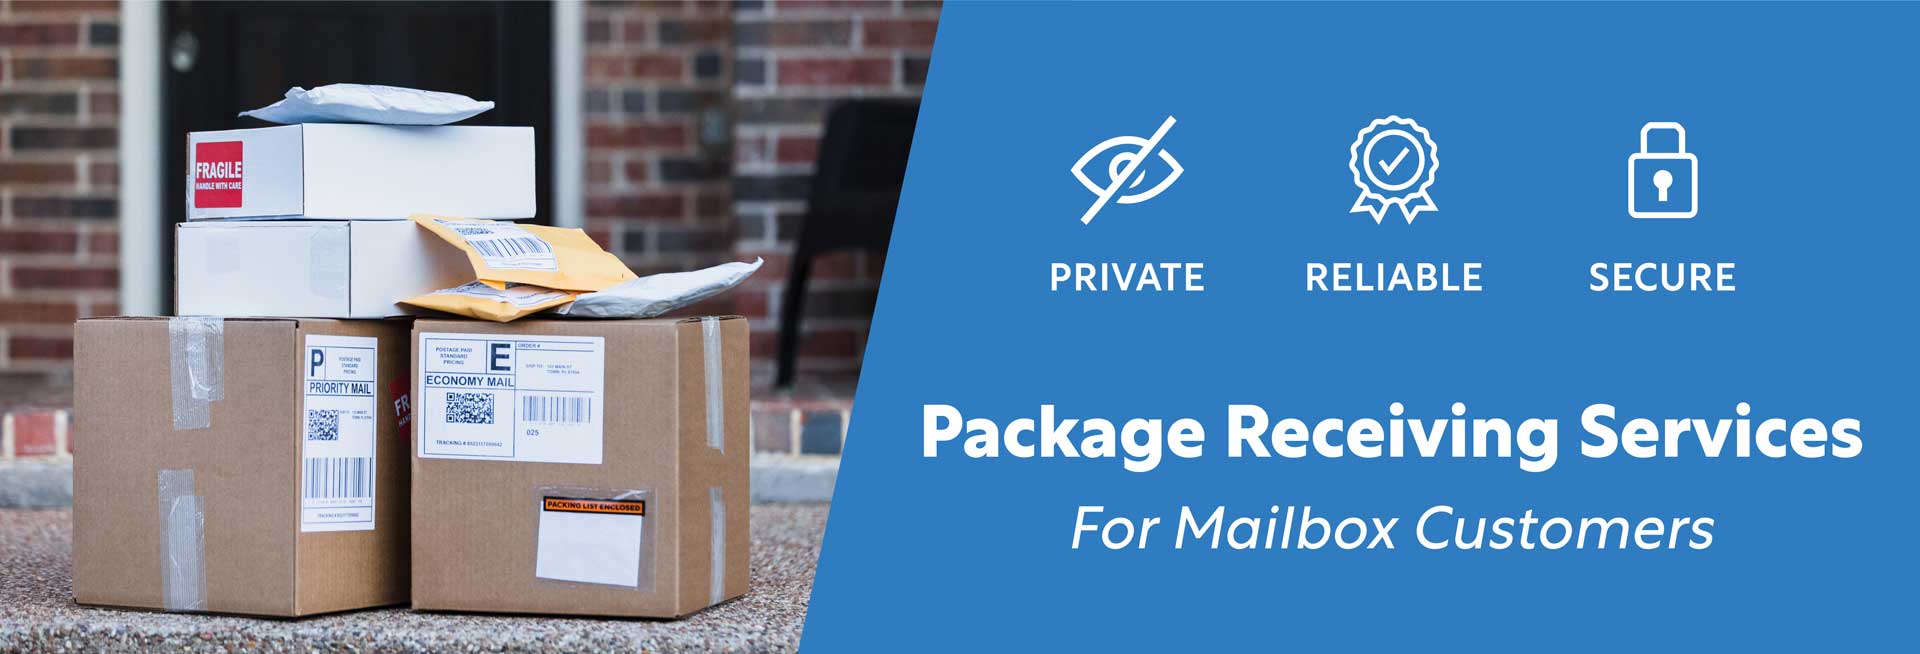 Package Receiving Services in San Diego - Allied Gardens / Mission Gorge